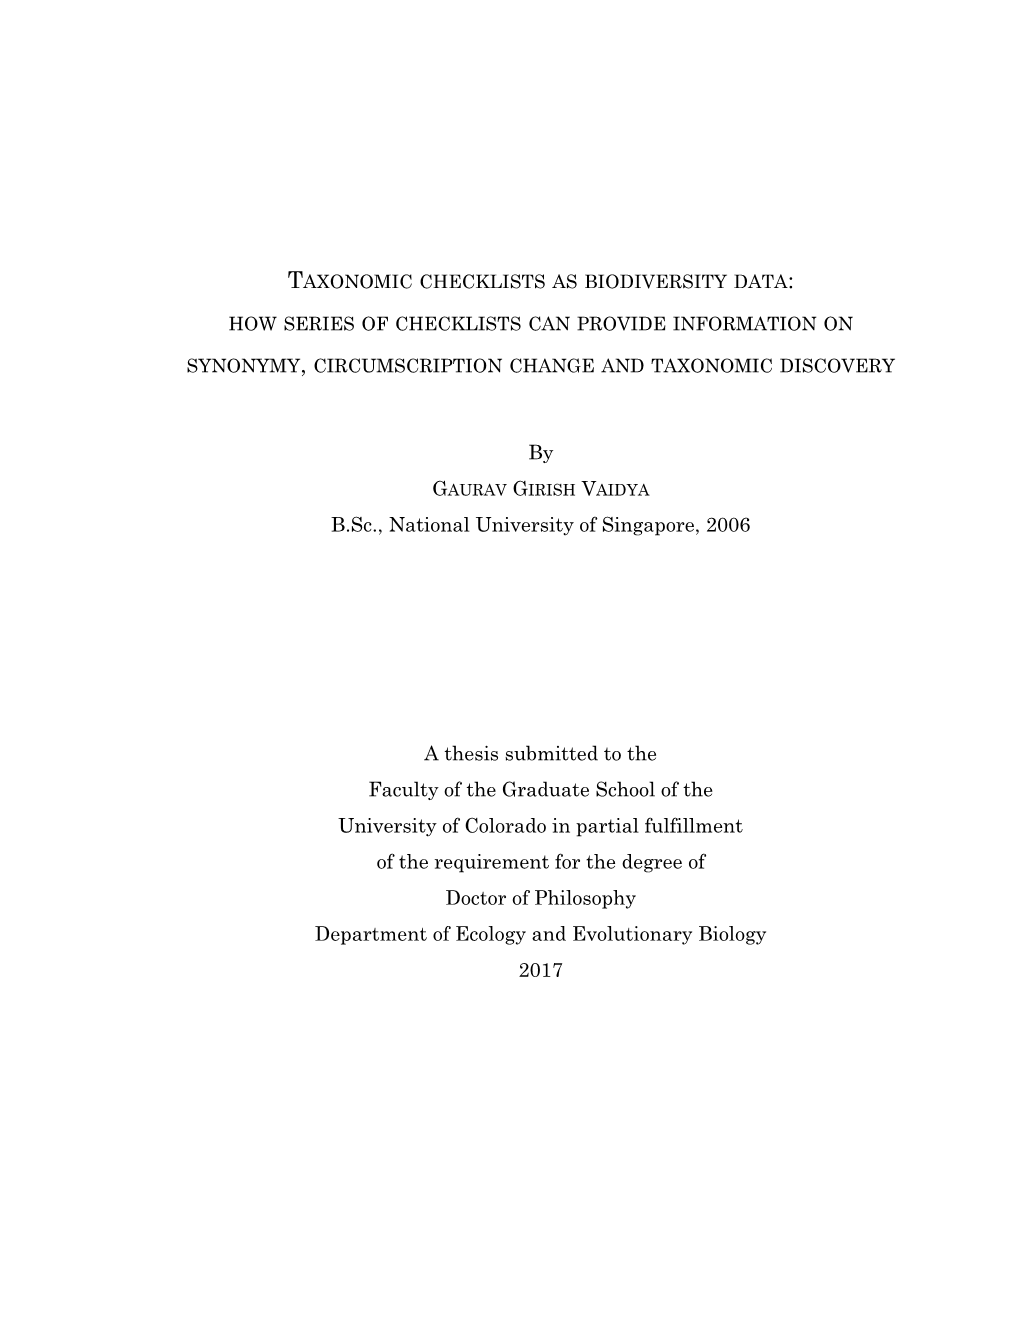 By B.Sc., National University of Singapore, 2006 a Thesis Submitted to the Faculty of the Graduate School of the University of C